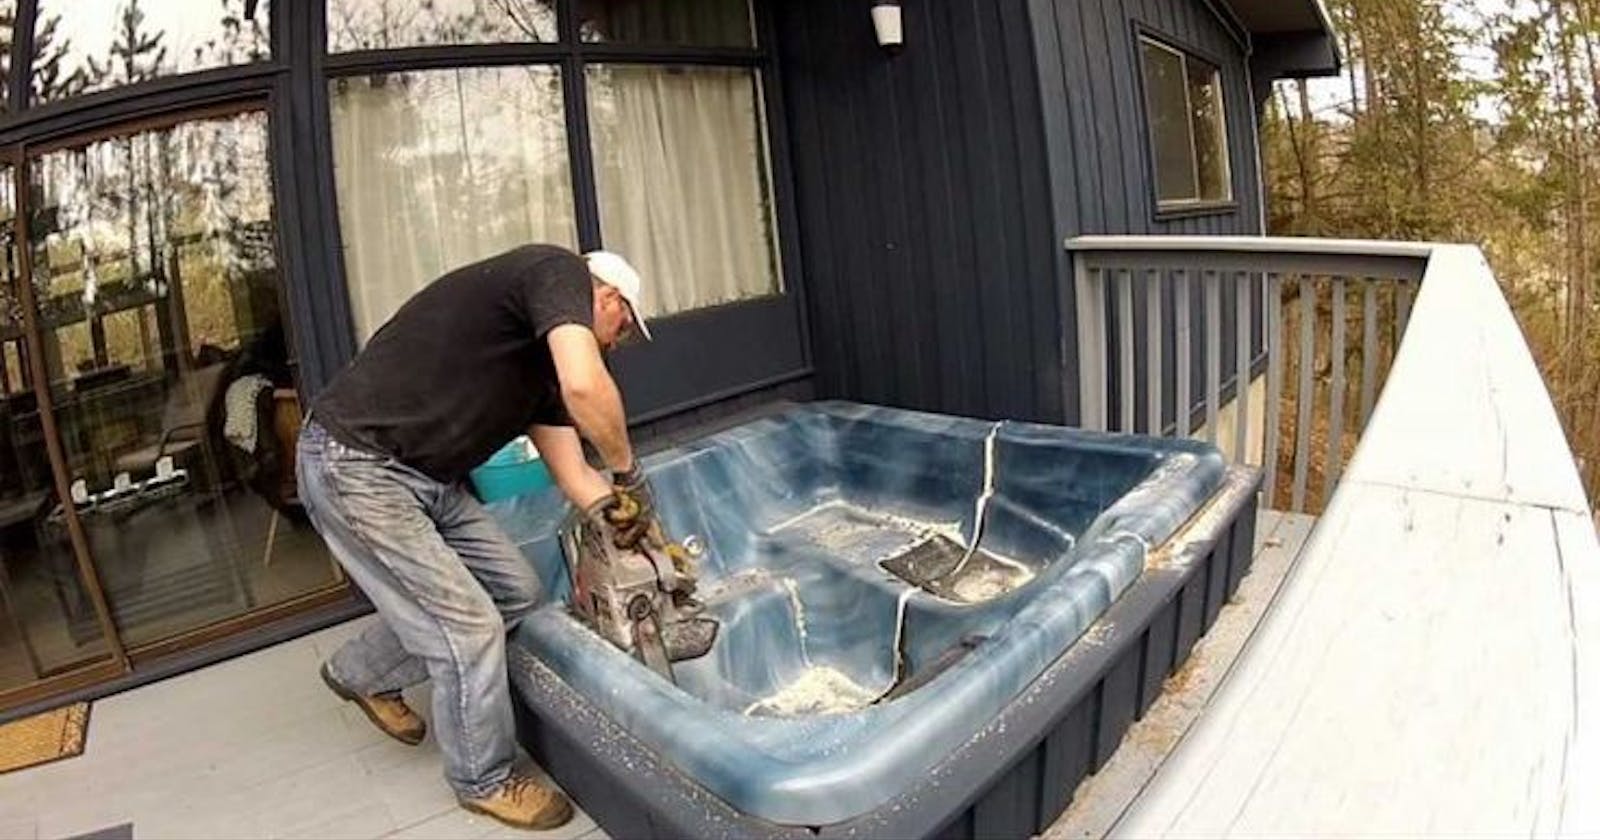 How Do You Dispose of a Hot Tub? - Hot Tub Removal